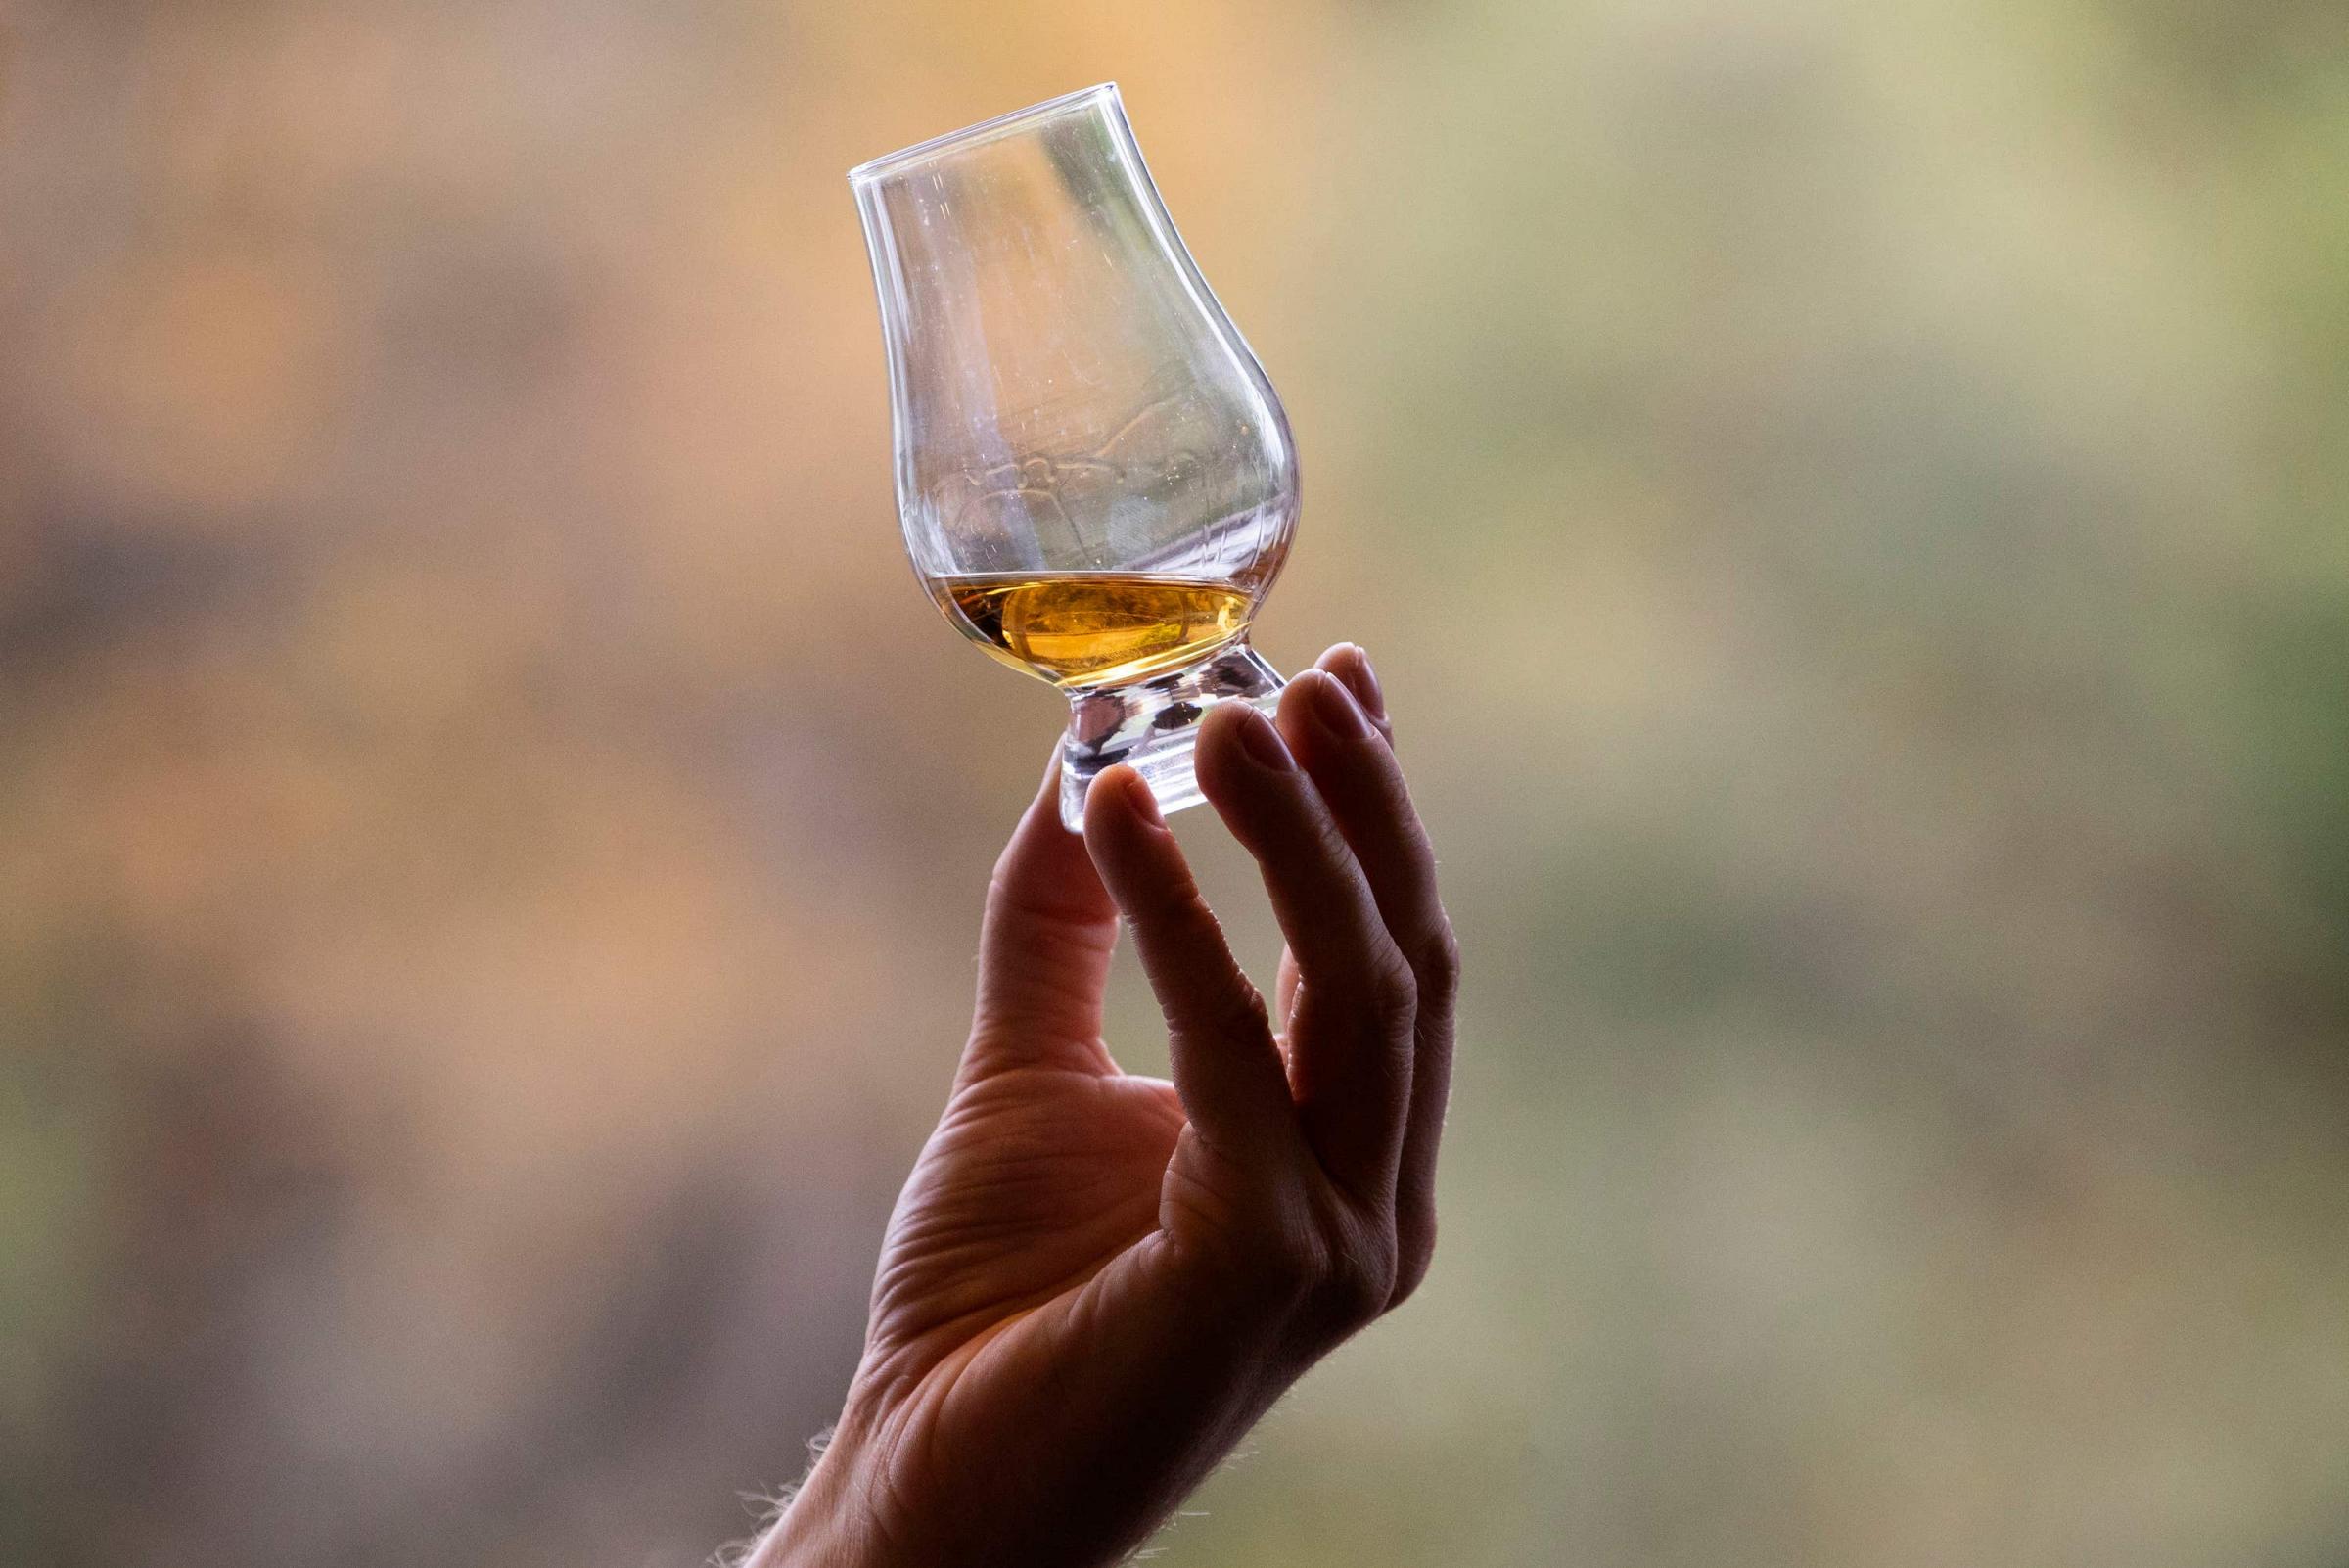 Whisky experiences for Burns Night across the UK from Buyagift, Experiences Days and more